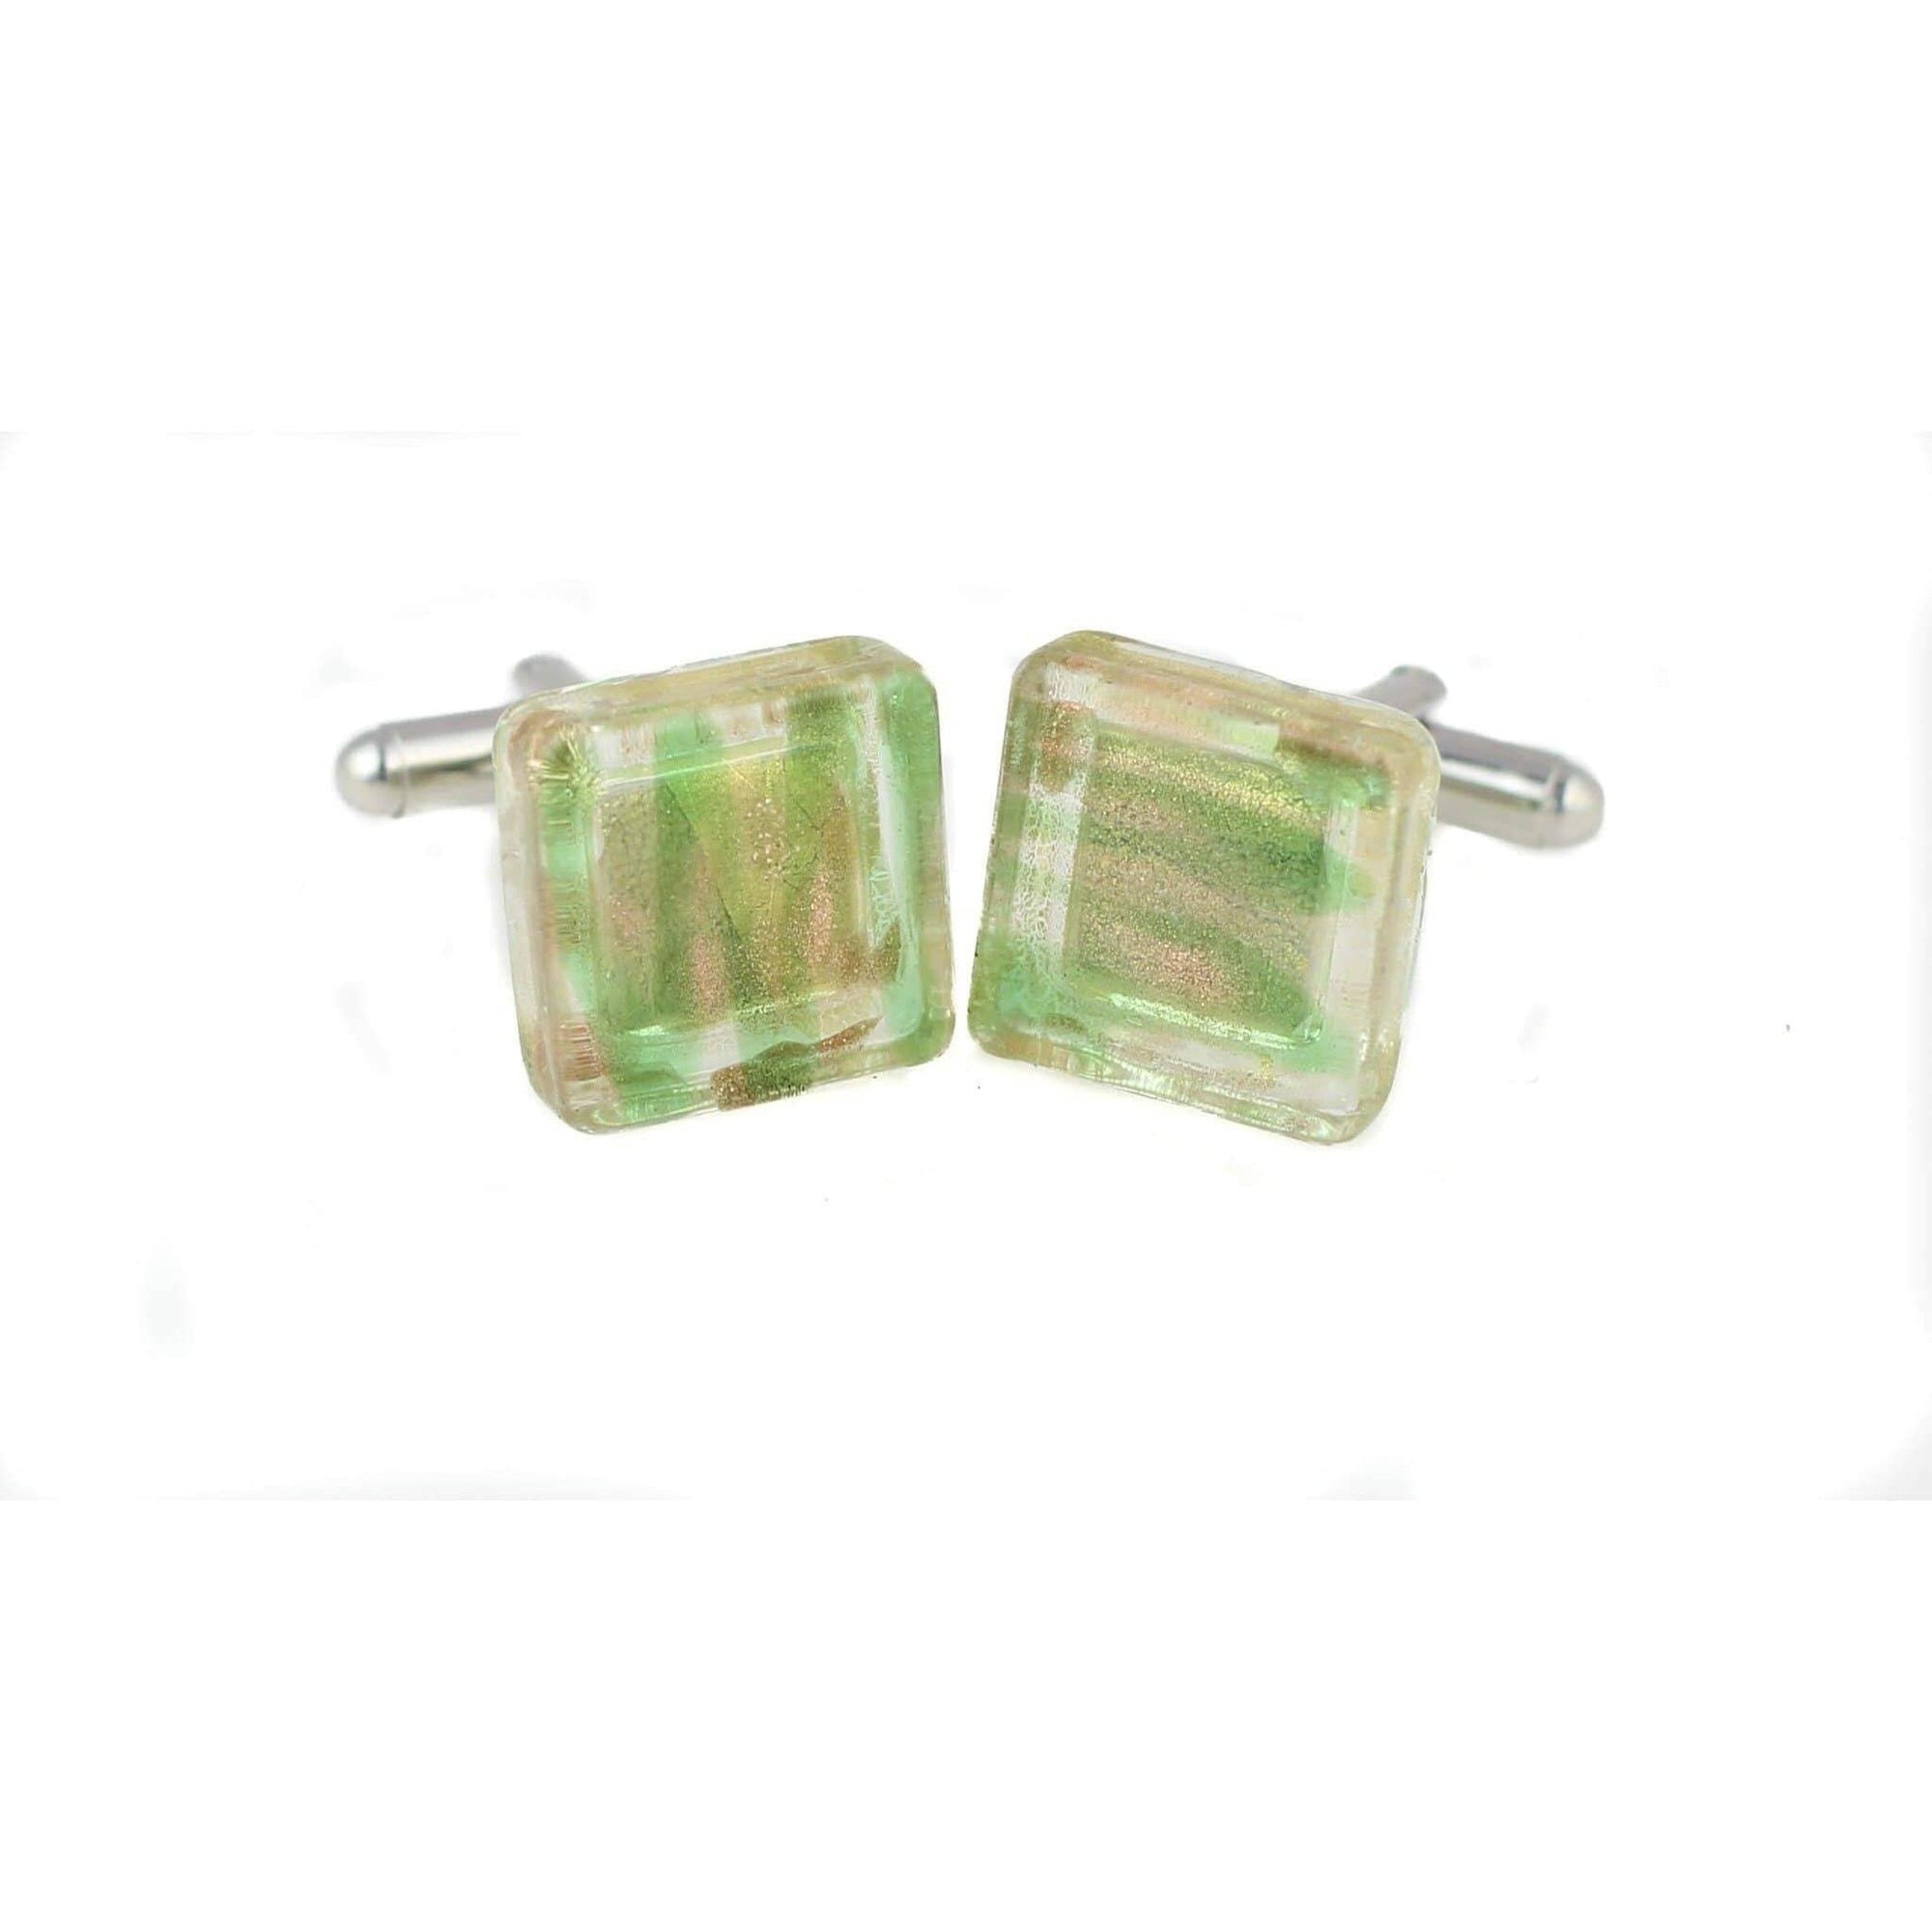 Yellow and Green Patterned Glass Cufflinks Classic & Modern Cufflinks Clinks Australia Yellow and Green Patterned Glass Cufflinks 